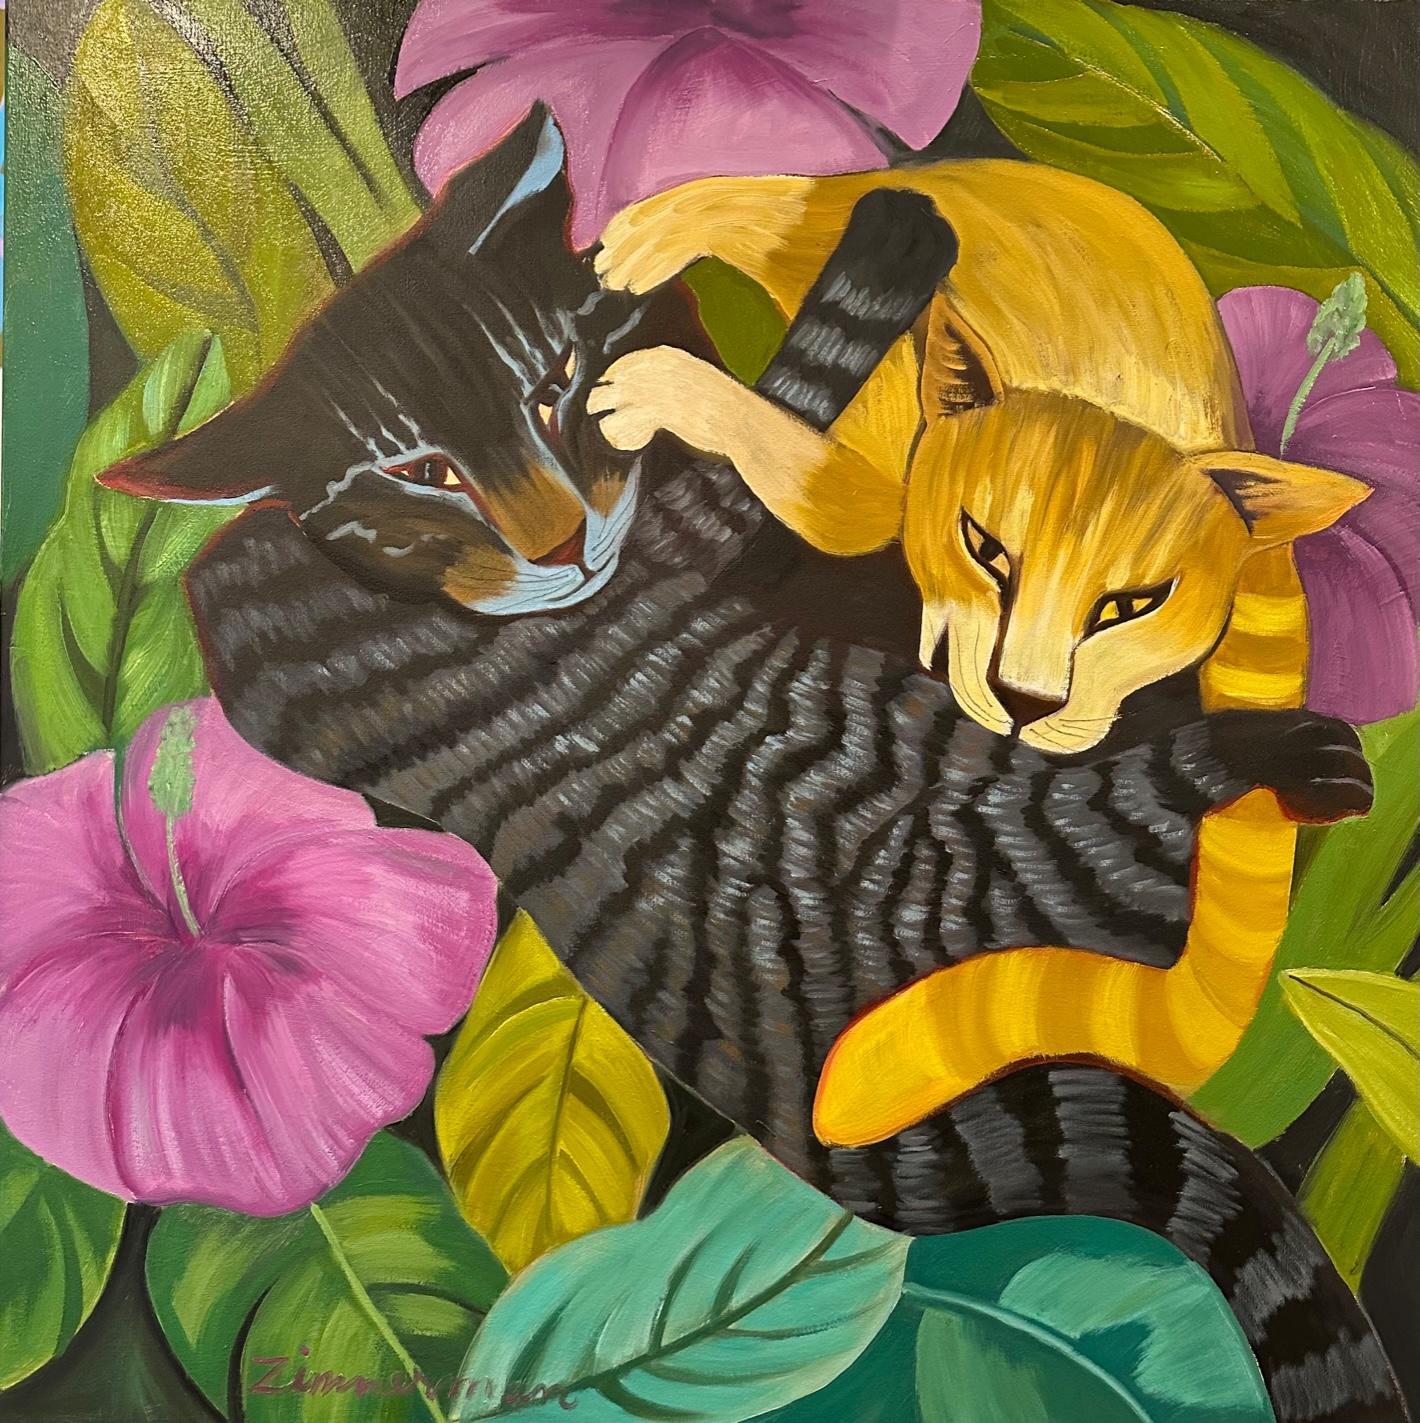 'Paws in Play' is a cheerful and lively painting that captures the playful and curious nature of cats in a beautiful setting.

'Paws in Play' adds a touch of whimsy and color to any room, while also creating a fun and inviting atmosphere that